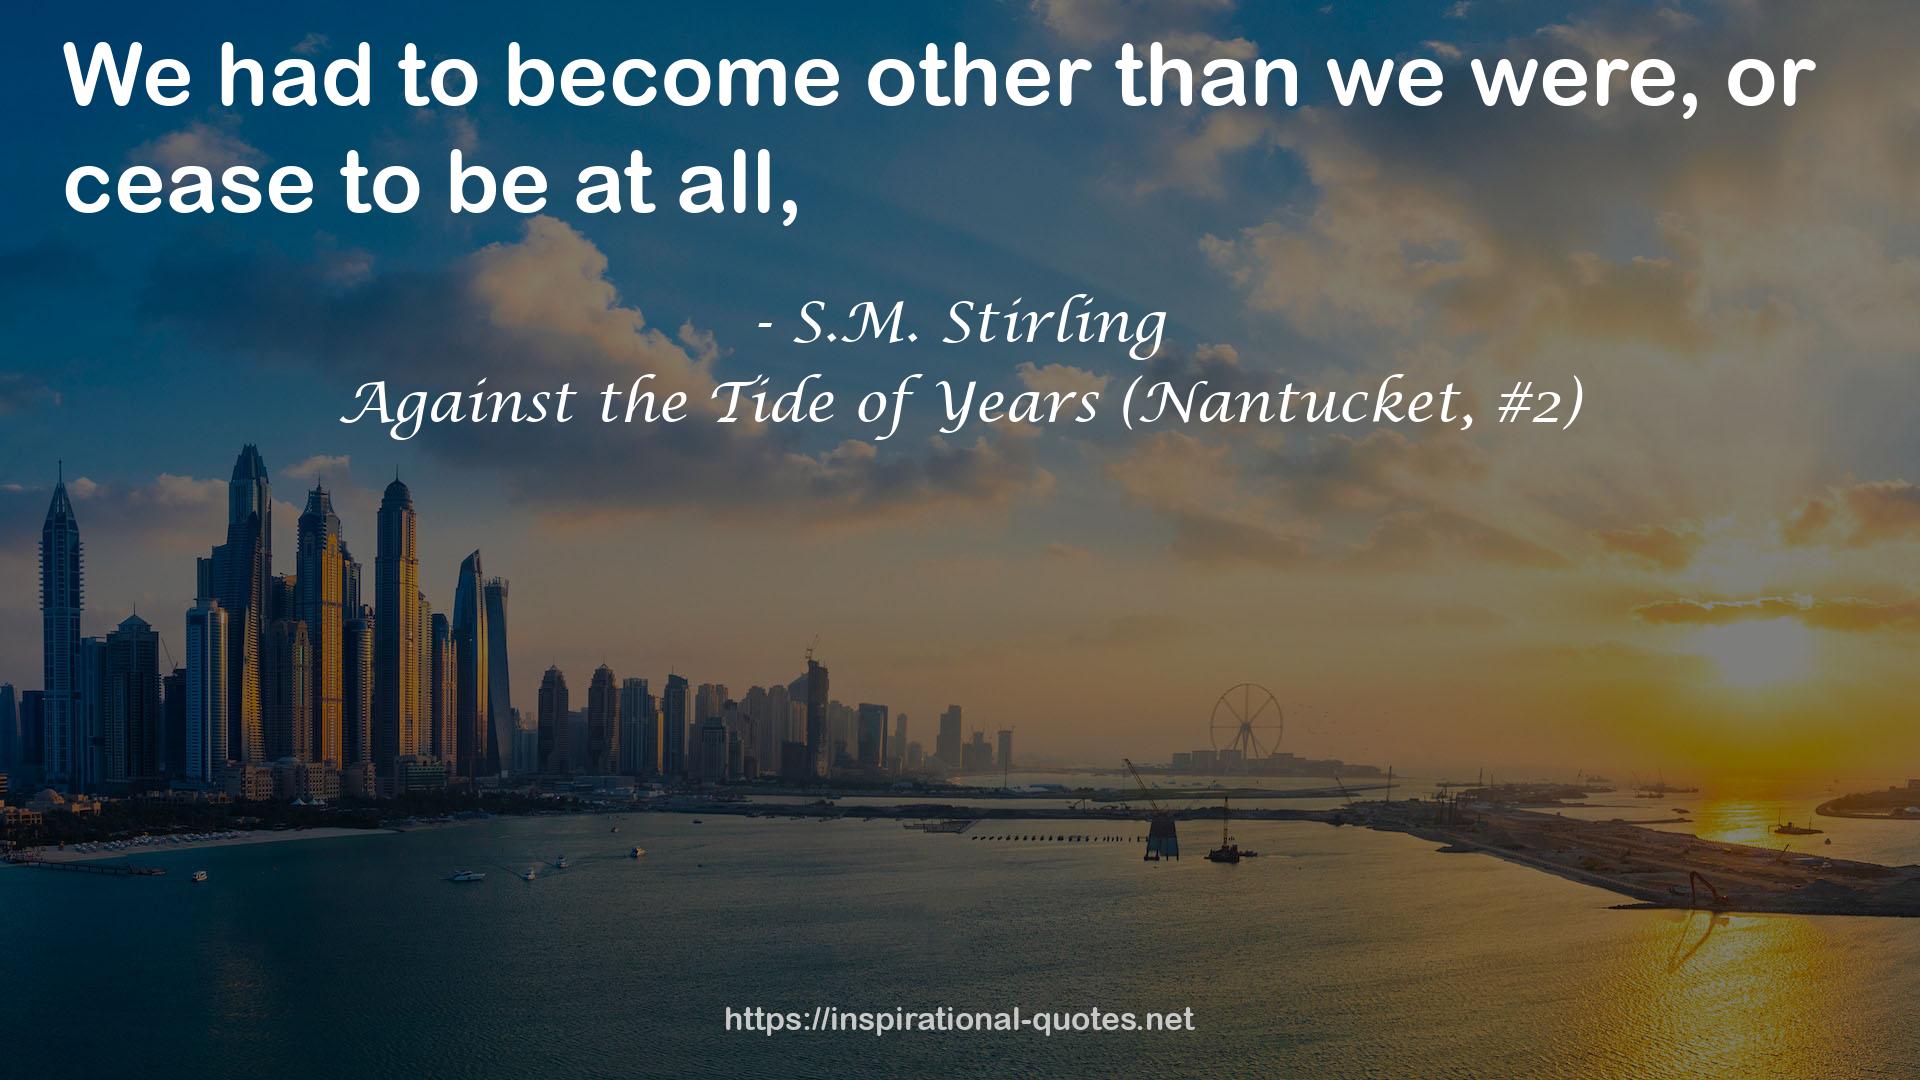 Against the Tide of Years (Nantucket, #2) QUOTES